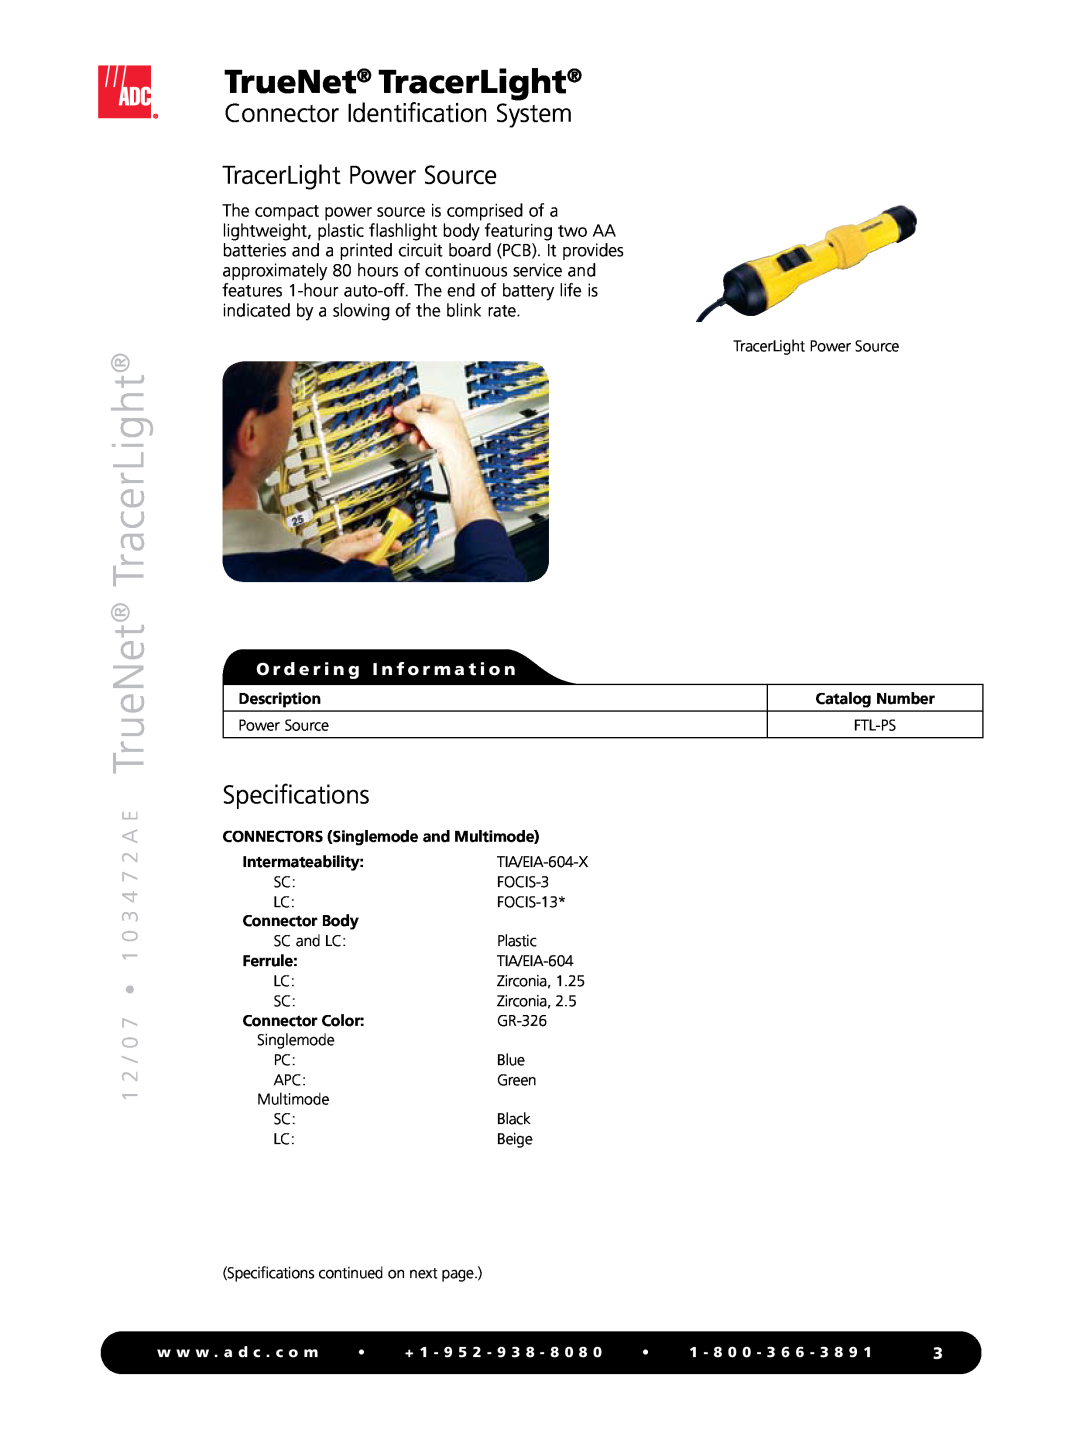 ADC TrueNet TracerLight manual Connector Identification System TracerLight Power Source, Specifications 